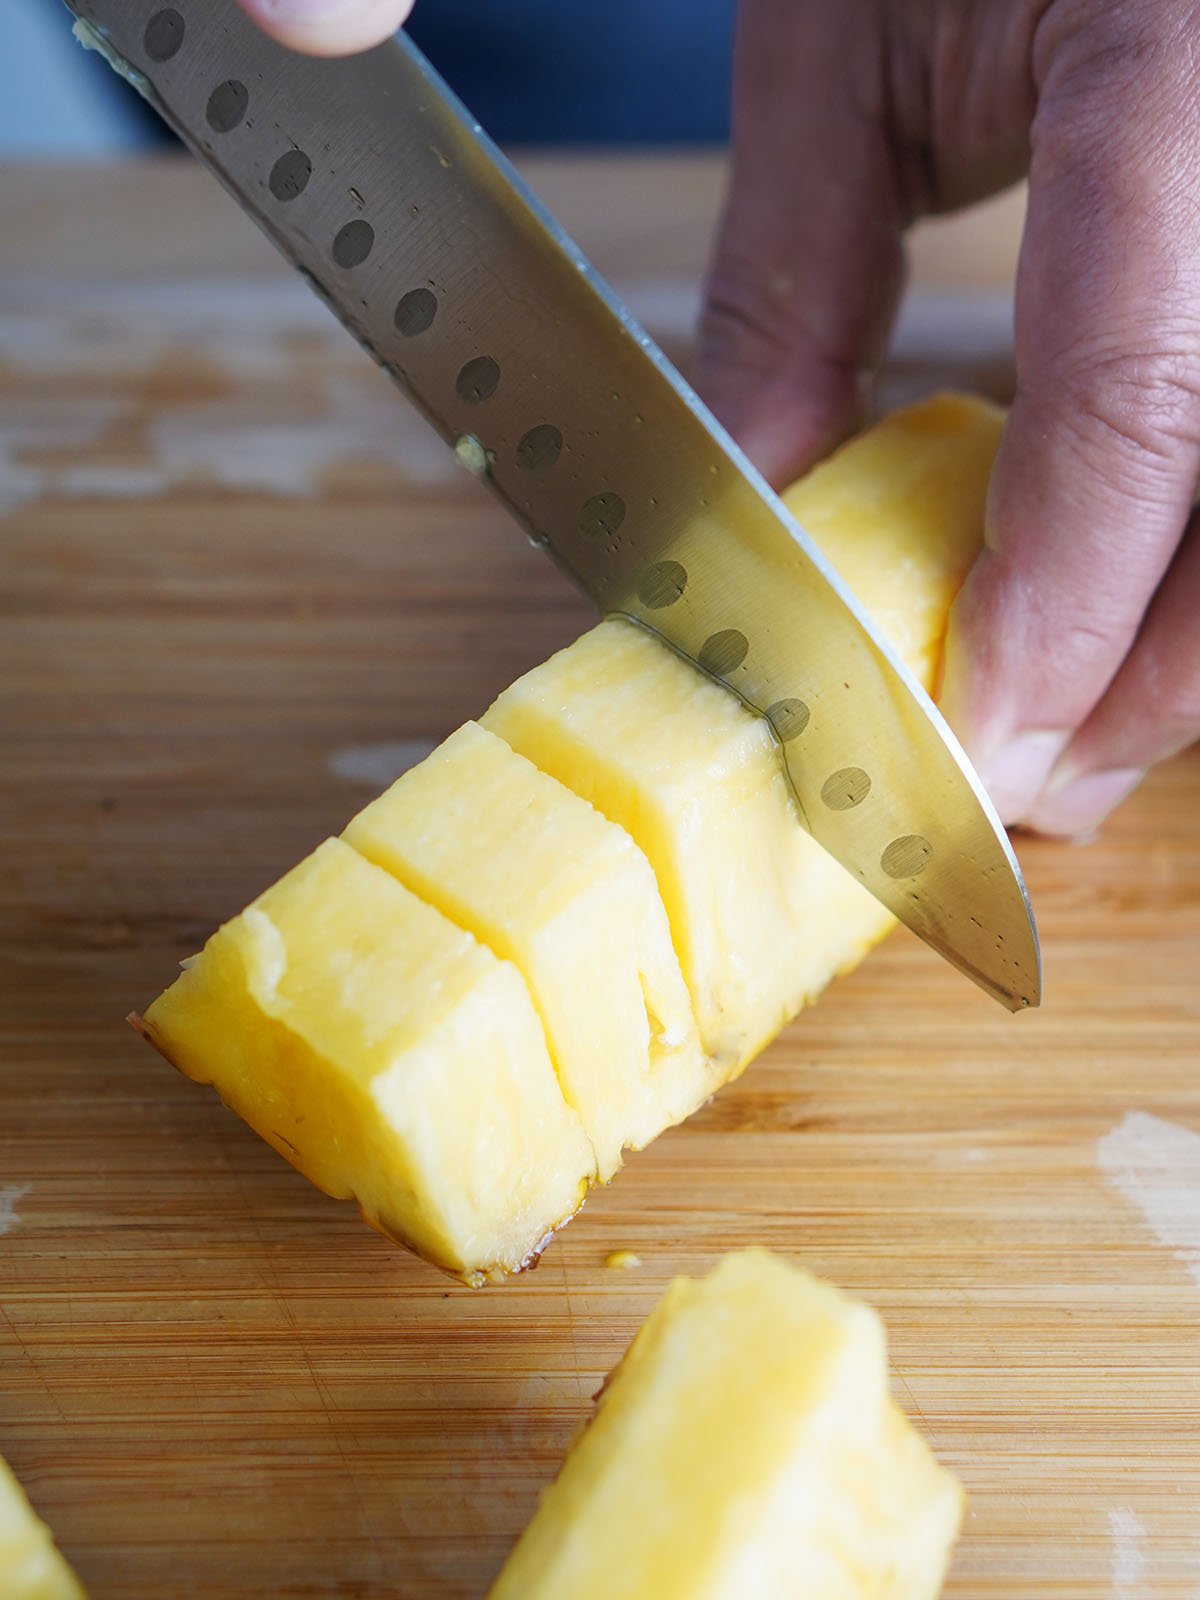 A hand holding a knife cutting thru pineapple slices.